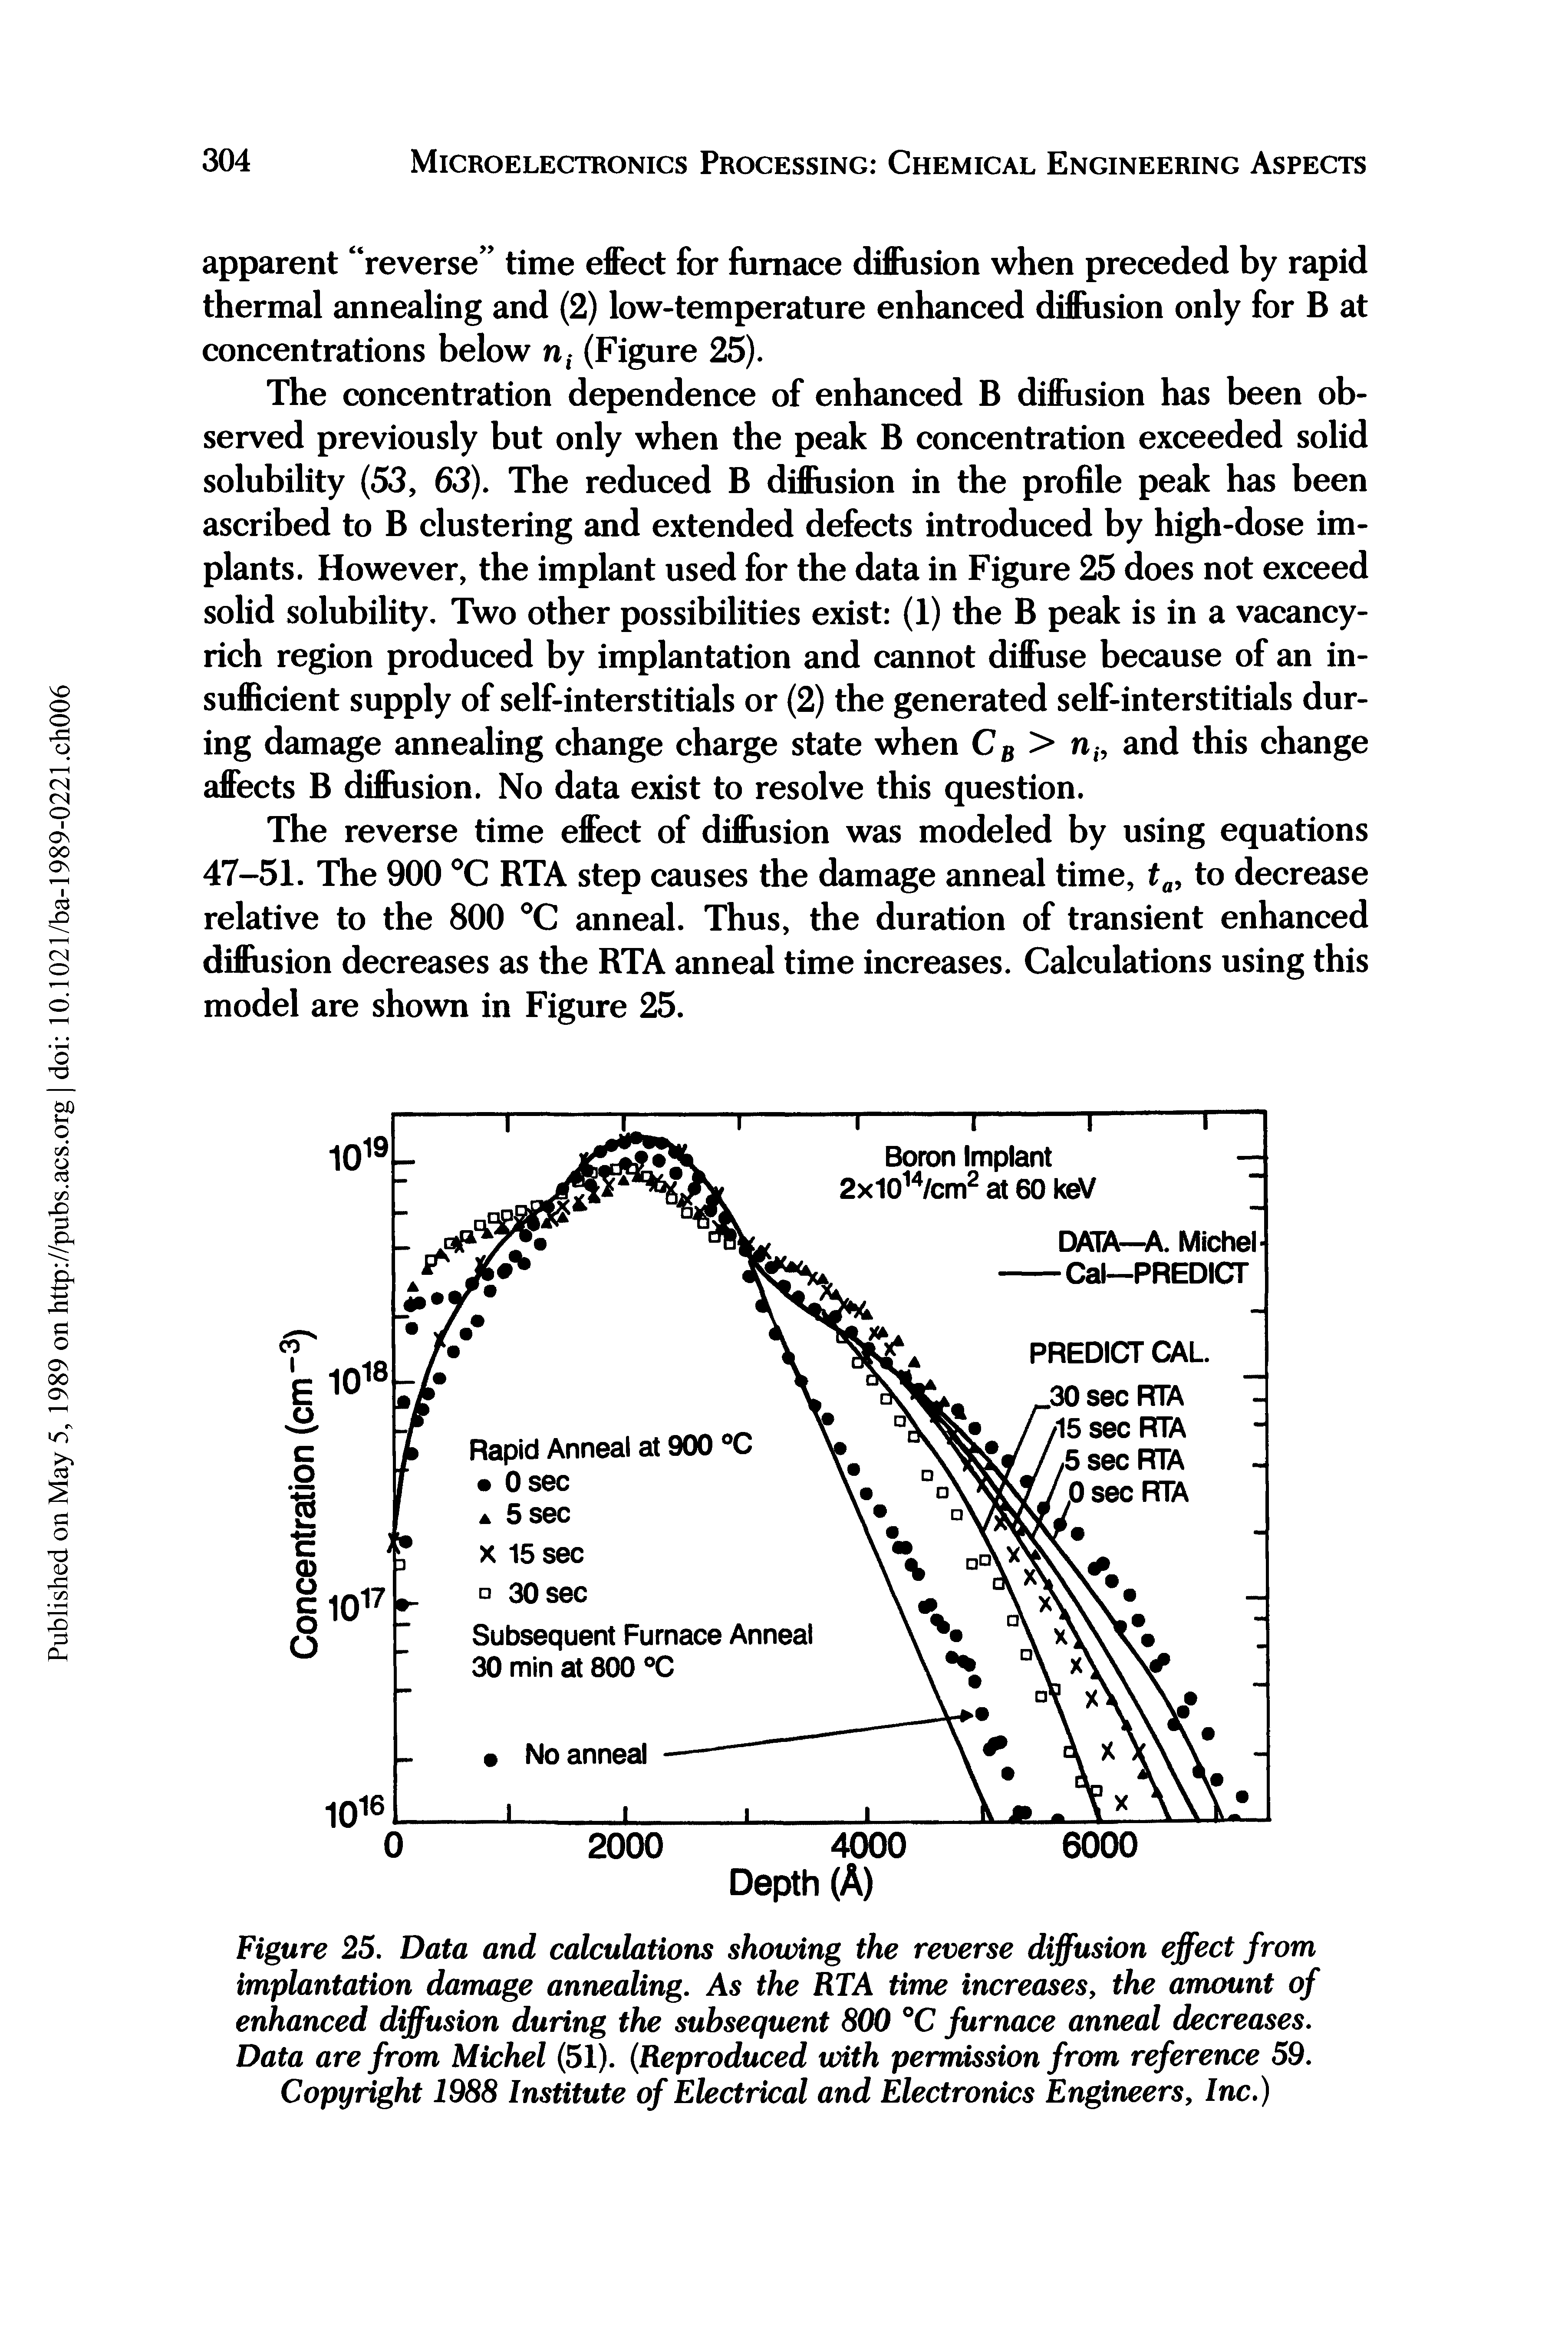 Figure 25. Data and calculations showing the reverse diffusion effect from implantation damage annealing. As the RTA time increases, the amount of enhanced diffusion during the subsequent 800 °C furnace anneal decreases. Data are from Michel (51). (Reproduced with permission from reference 59. Copyright 1988 Institute of Electrical and Electronics Engineers, Inc.)...